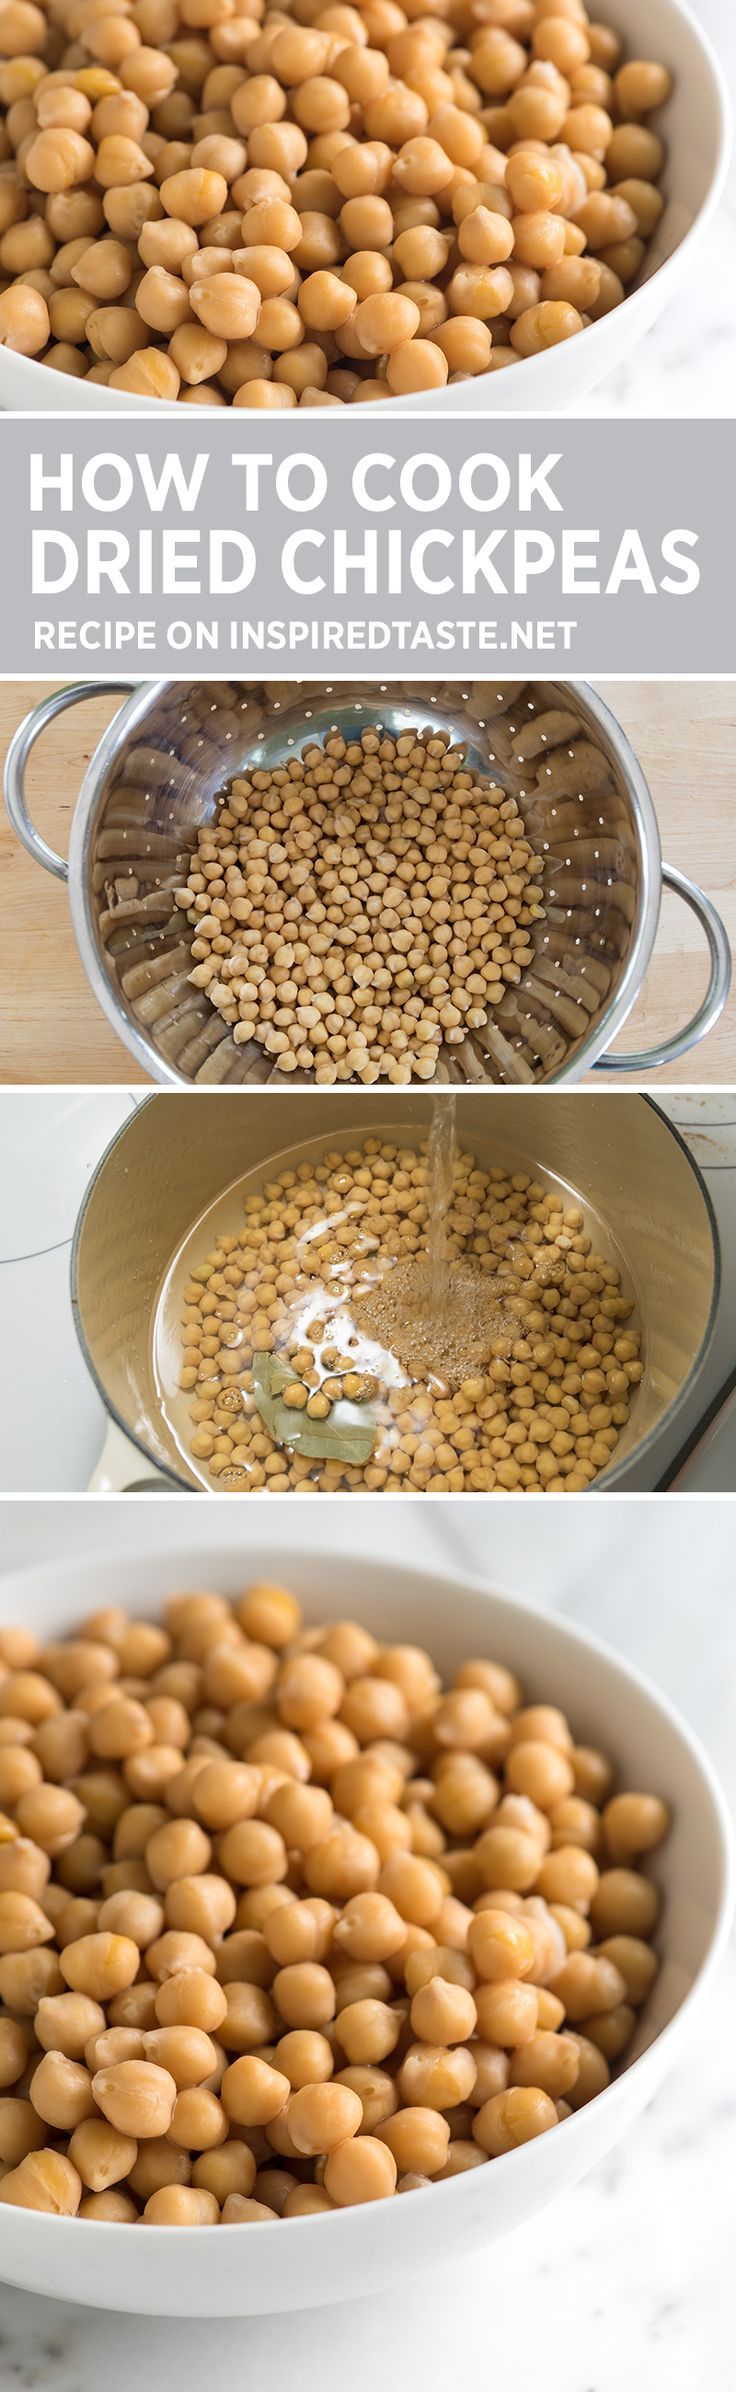 Can You Cook Chickpeas From Dry